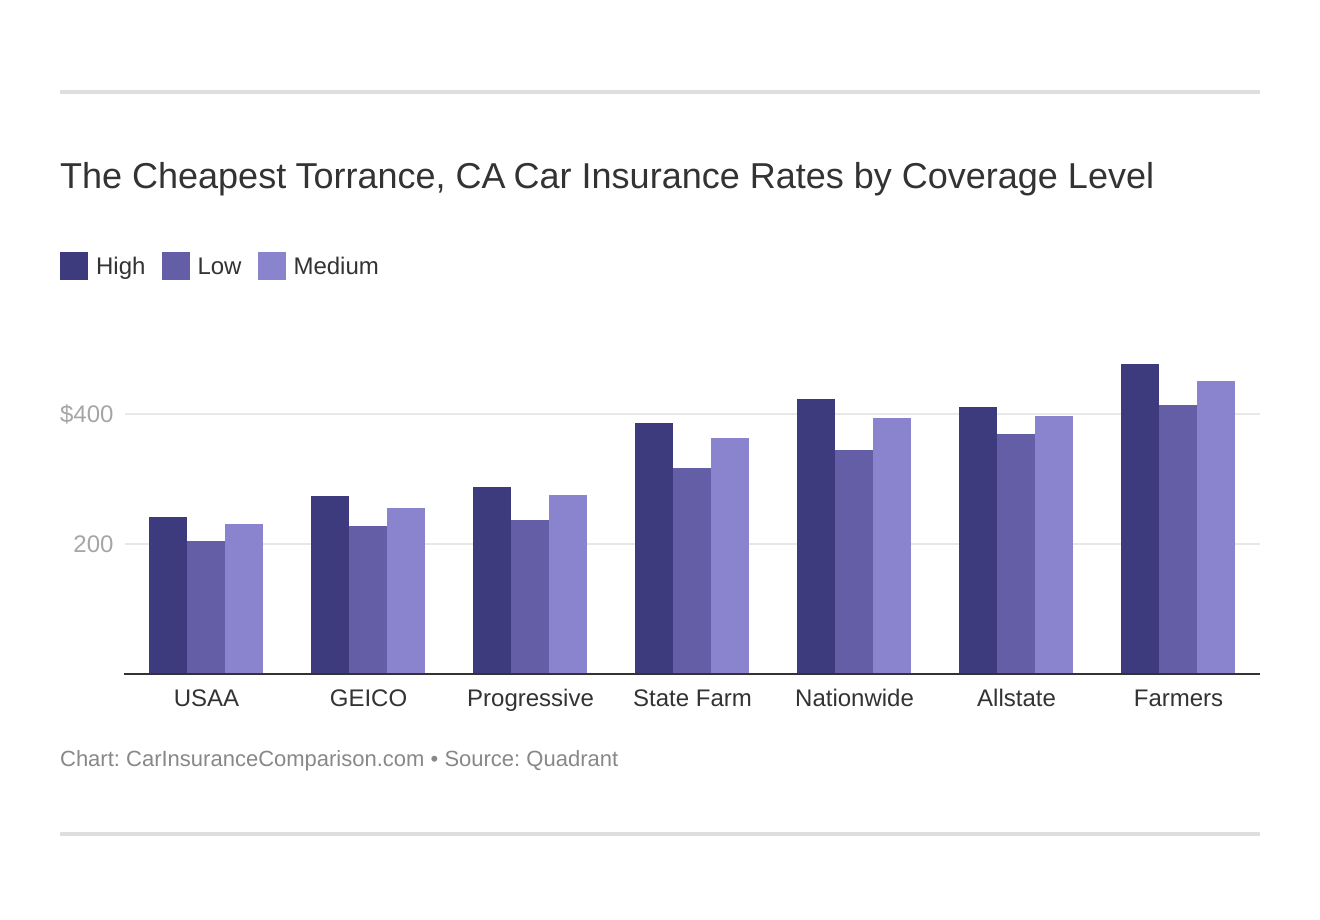 The Cheapest Torrance, CA Car Insurance Rates by Coverage Level